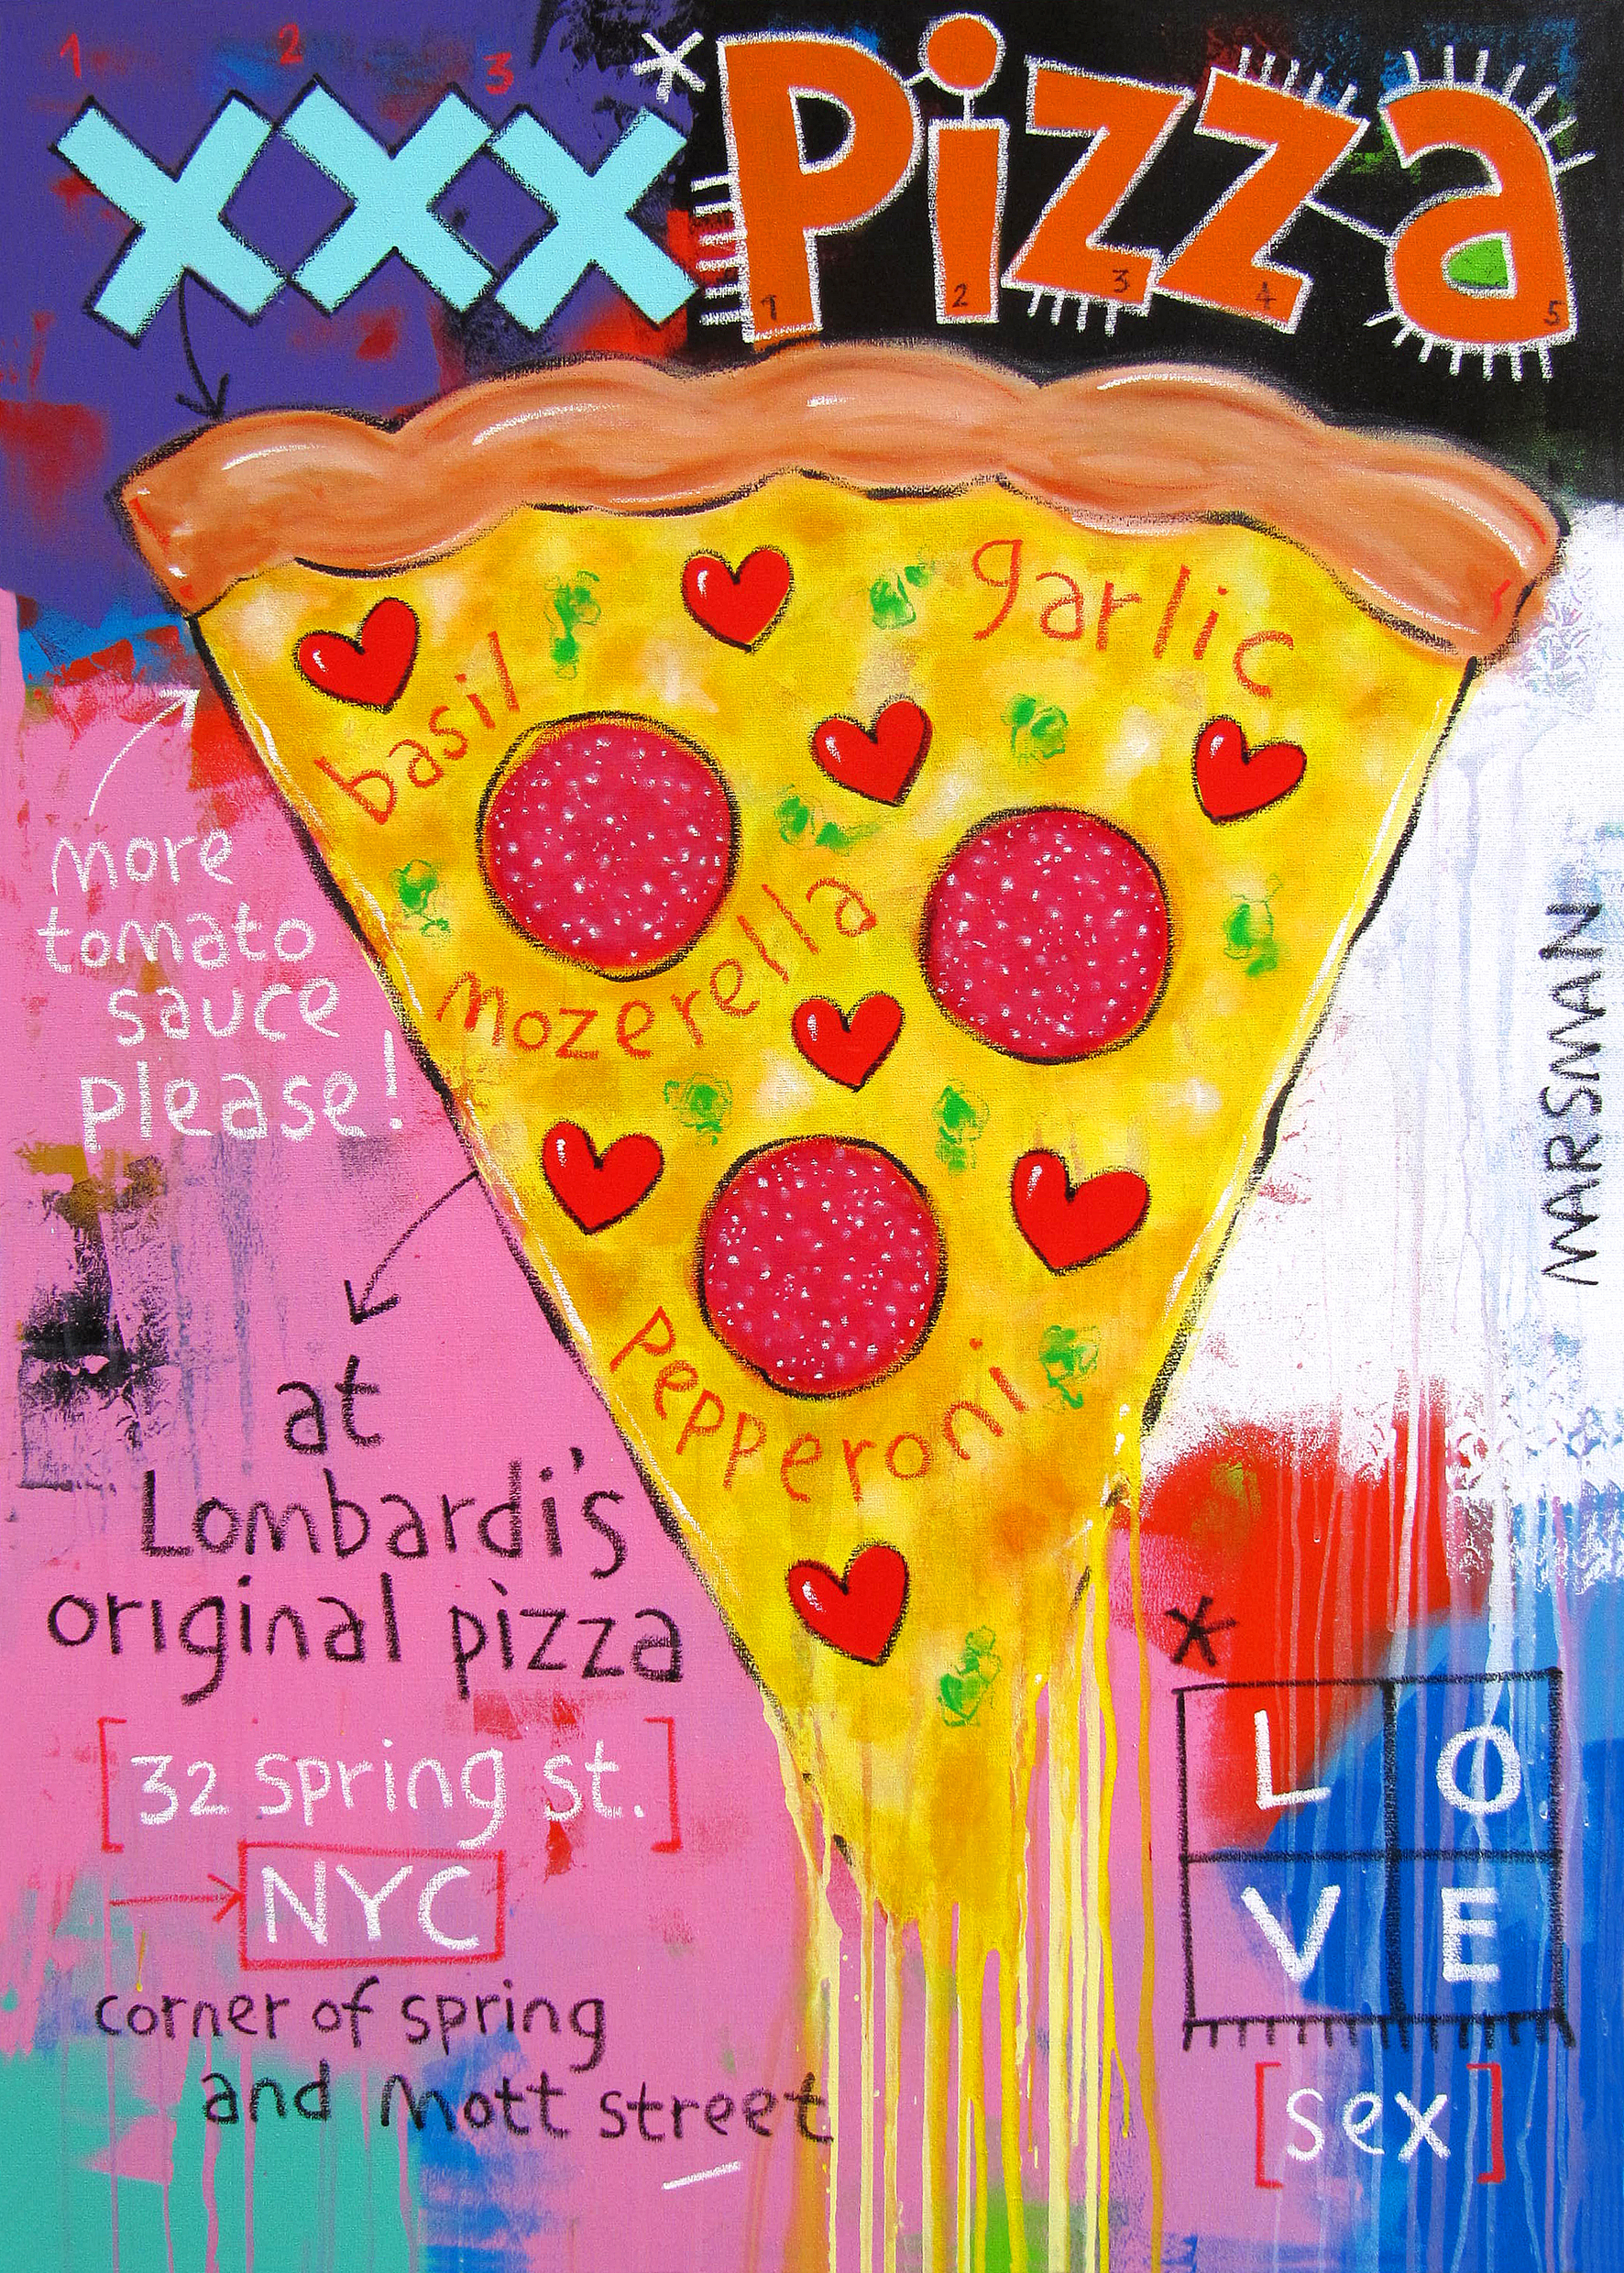 <b>XXX-PIZZA</b> - 100 x 140 cm - acrylic and oilstick on canvas - SOLD  <a style="color: red; text-decoration: none" href="mailto:jpgpmarsman@onsbrabantnet.nl">BESTEL</a>